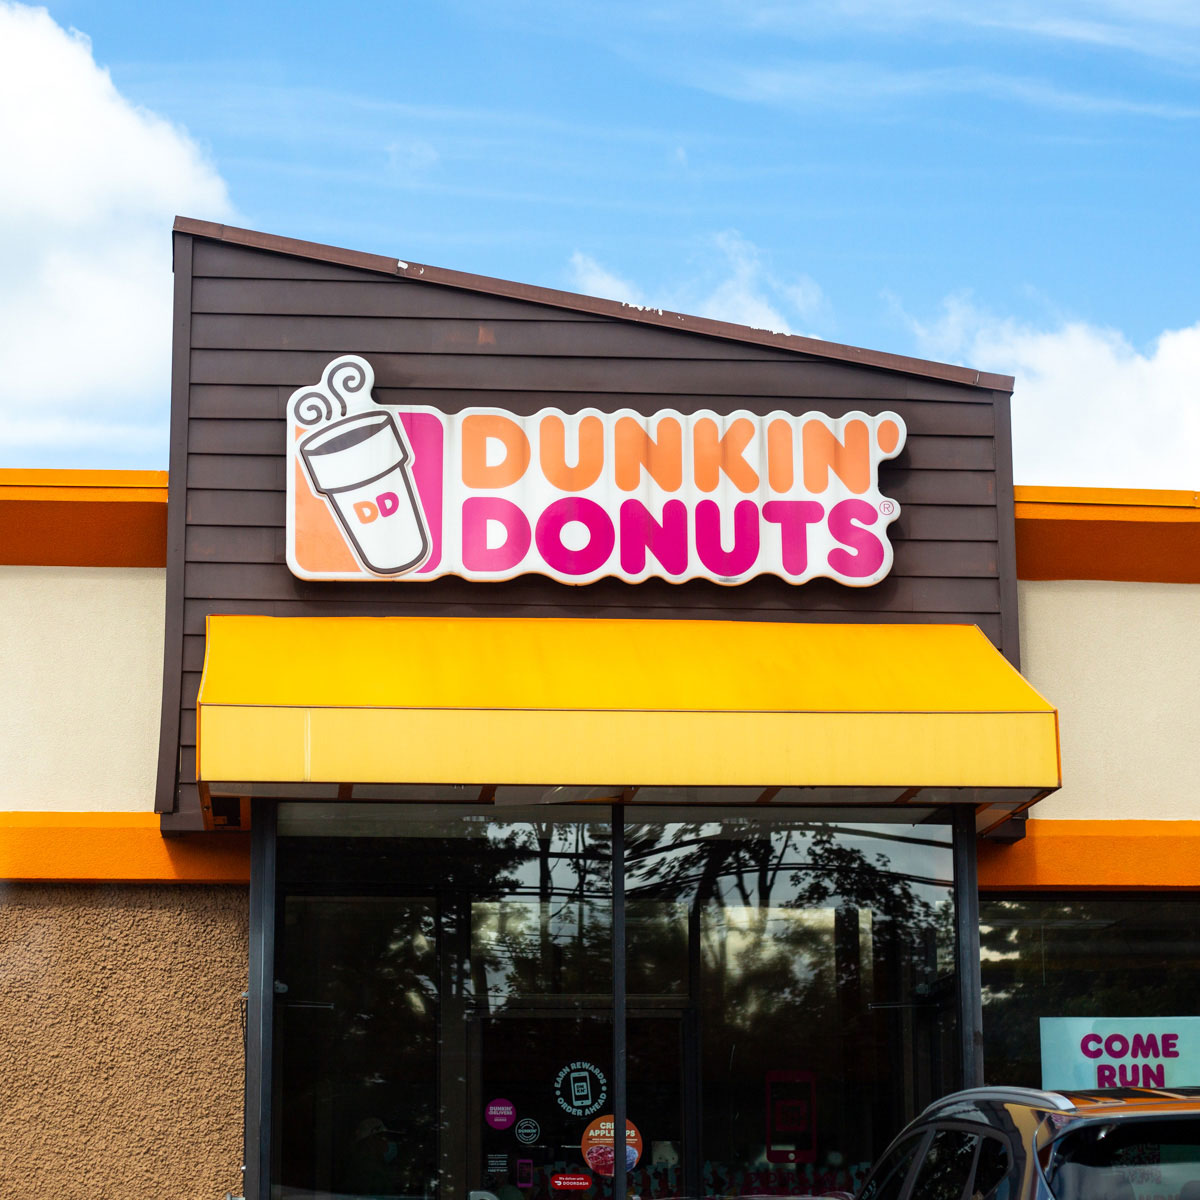 Donate Joy with Every Cup: Dunkin' Iced Coffee Day Returns on May 23